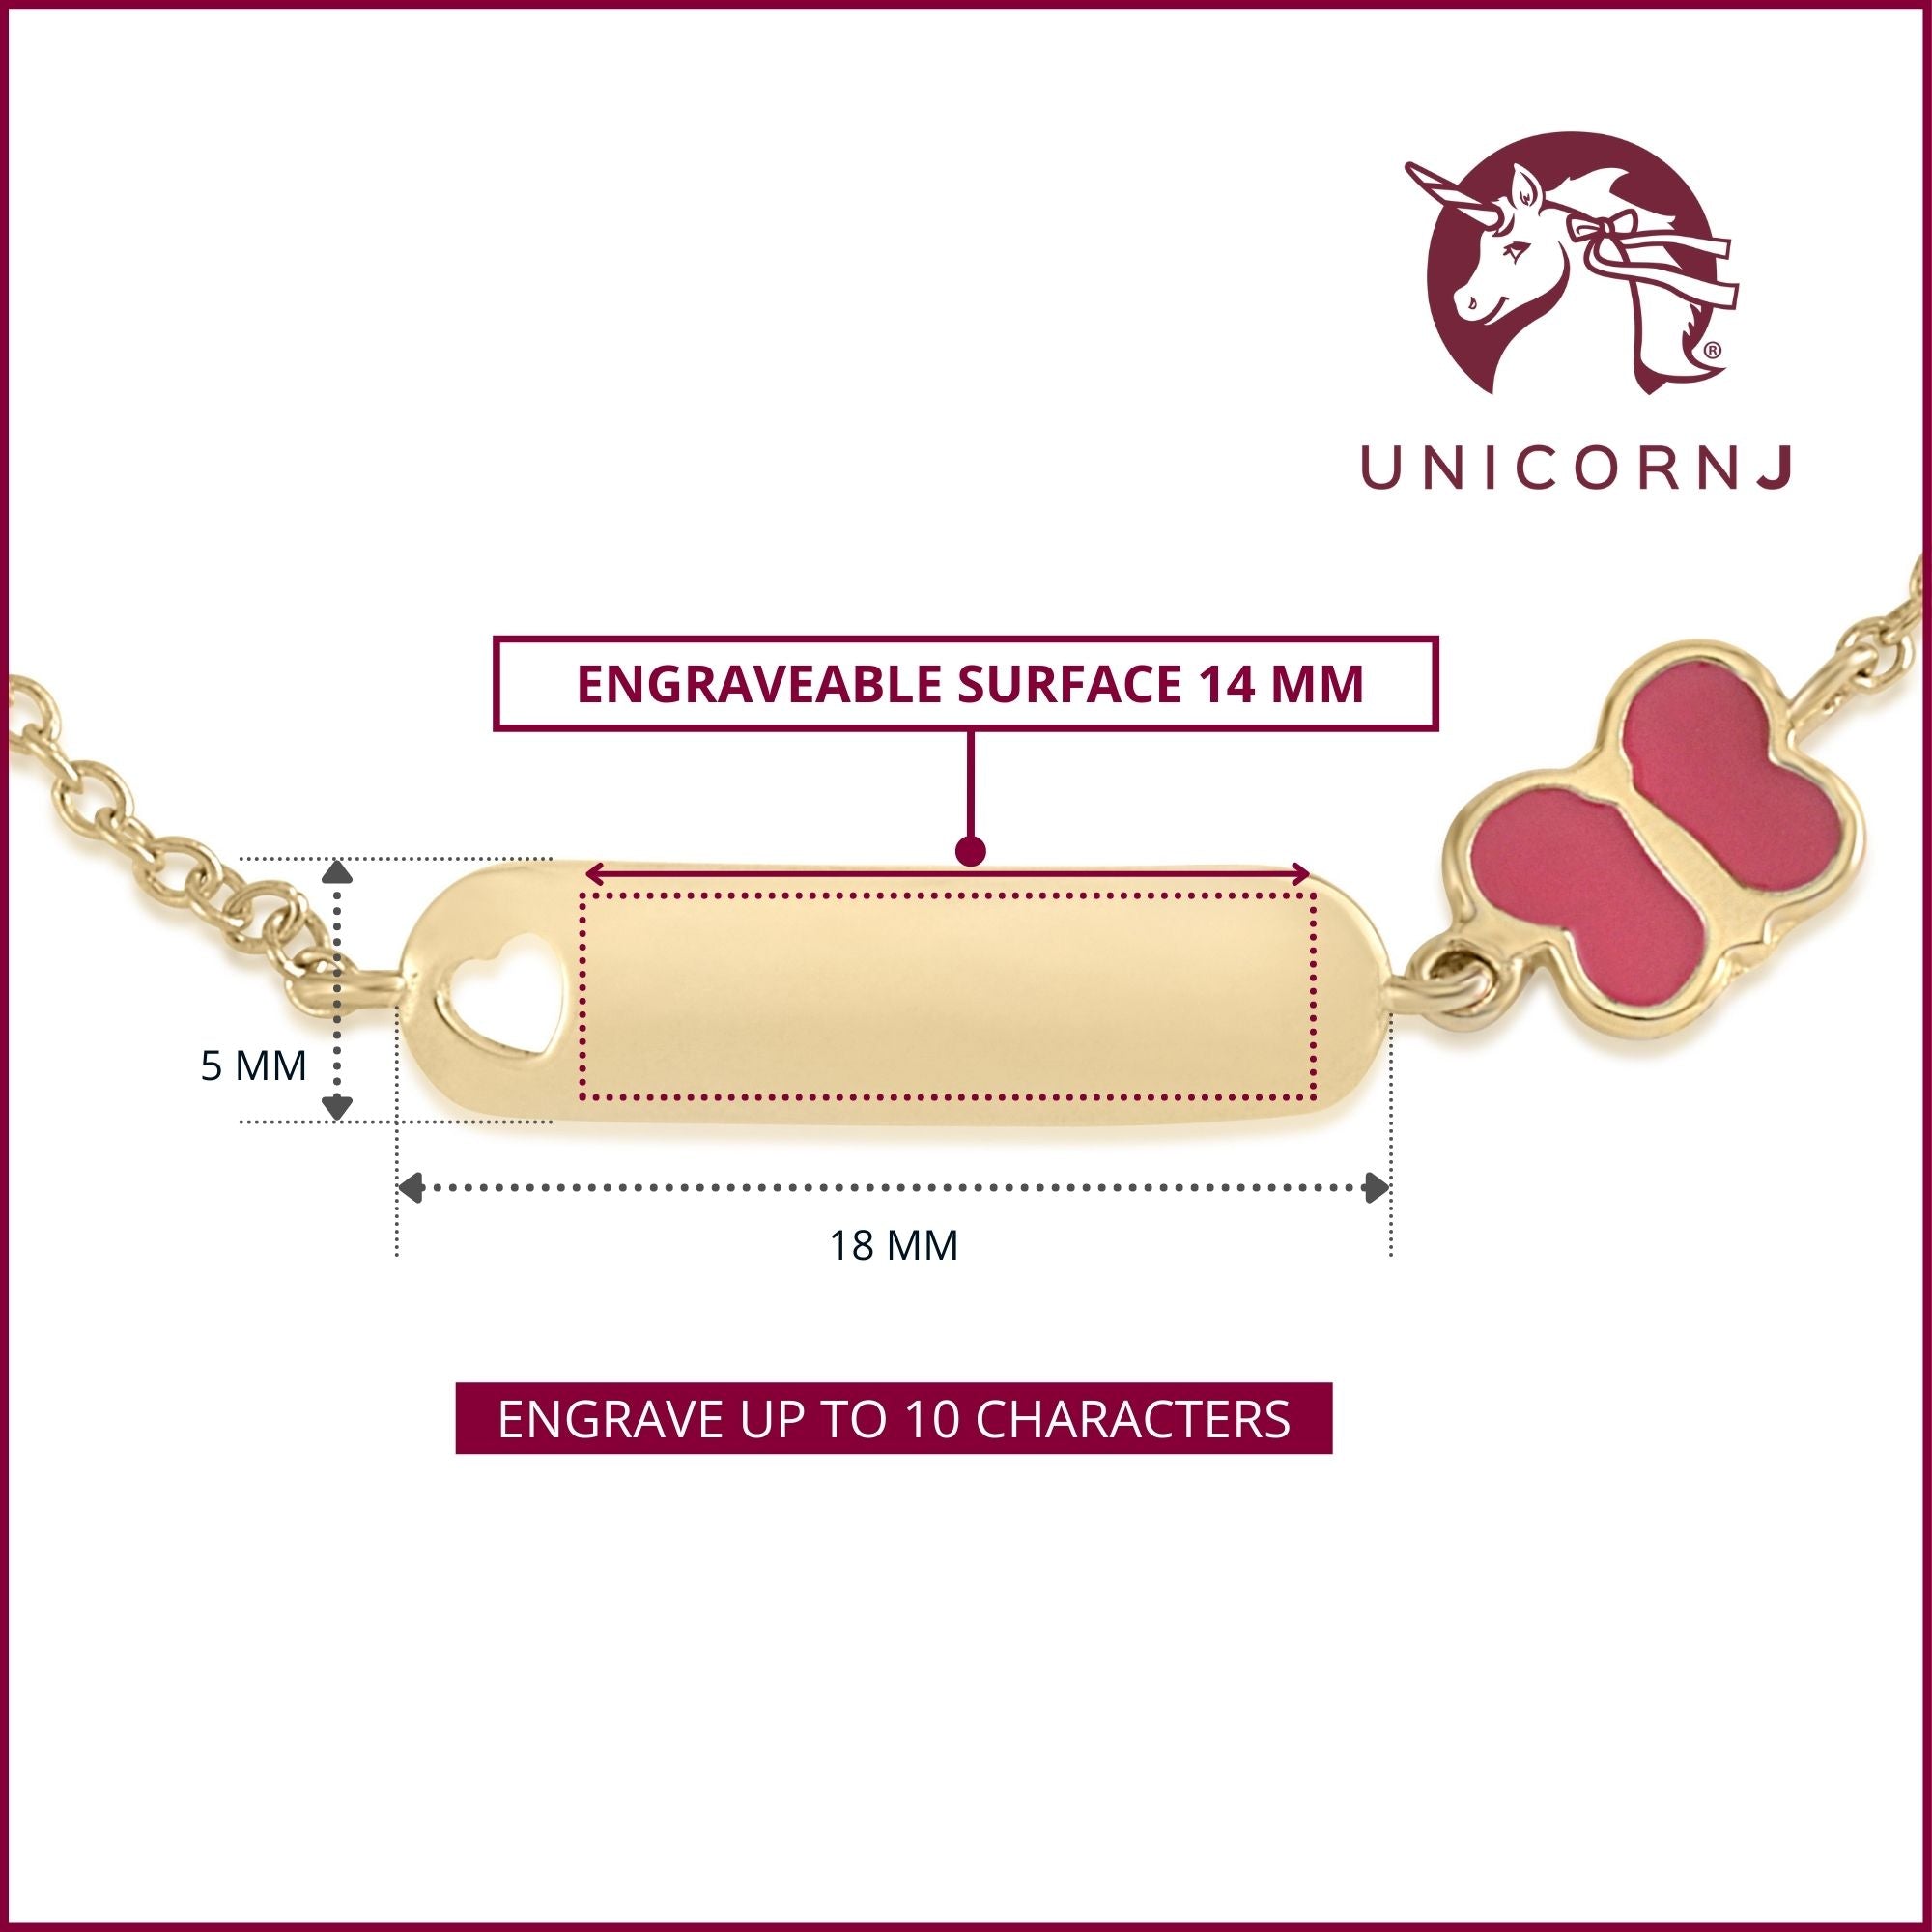 UNICORNJ 14K Yellow Gold Childrens ID Bracelet with Butterfly Charm Red Enamel 5.5" Italy